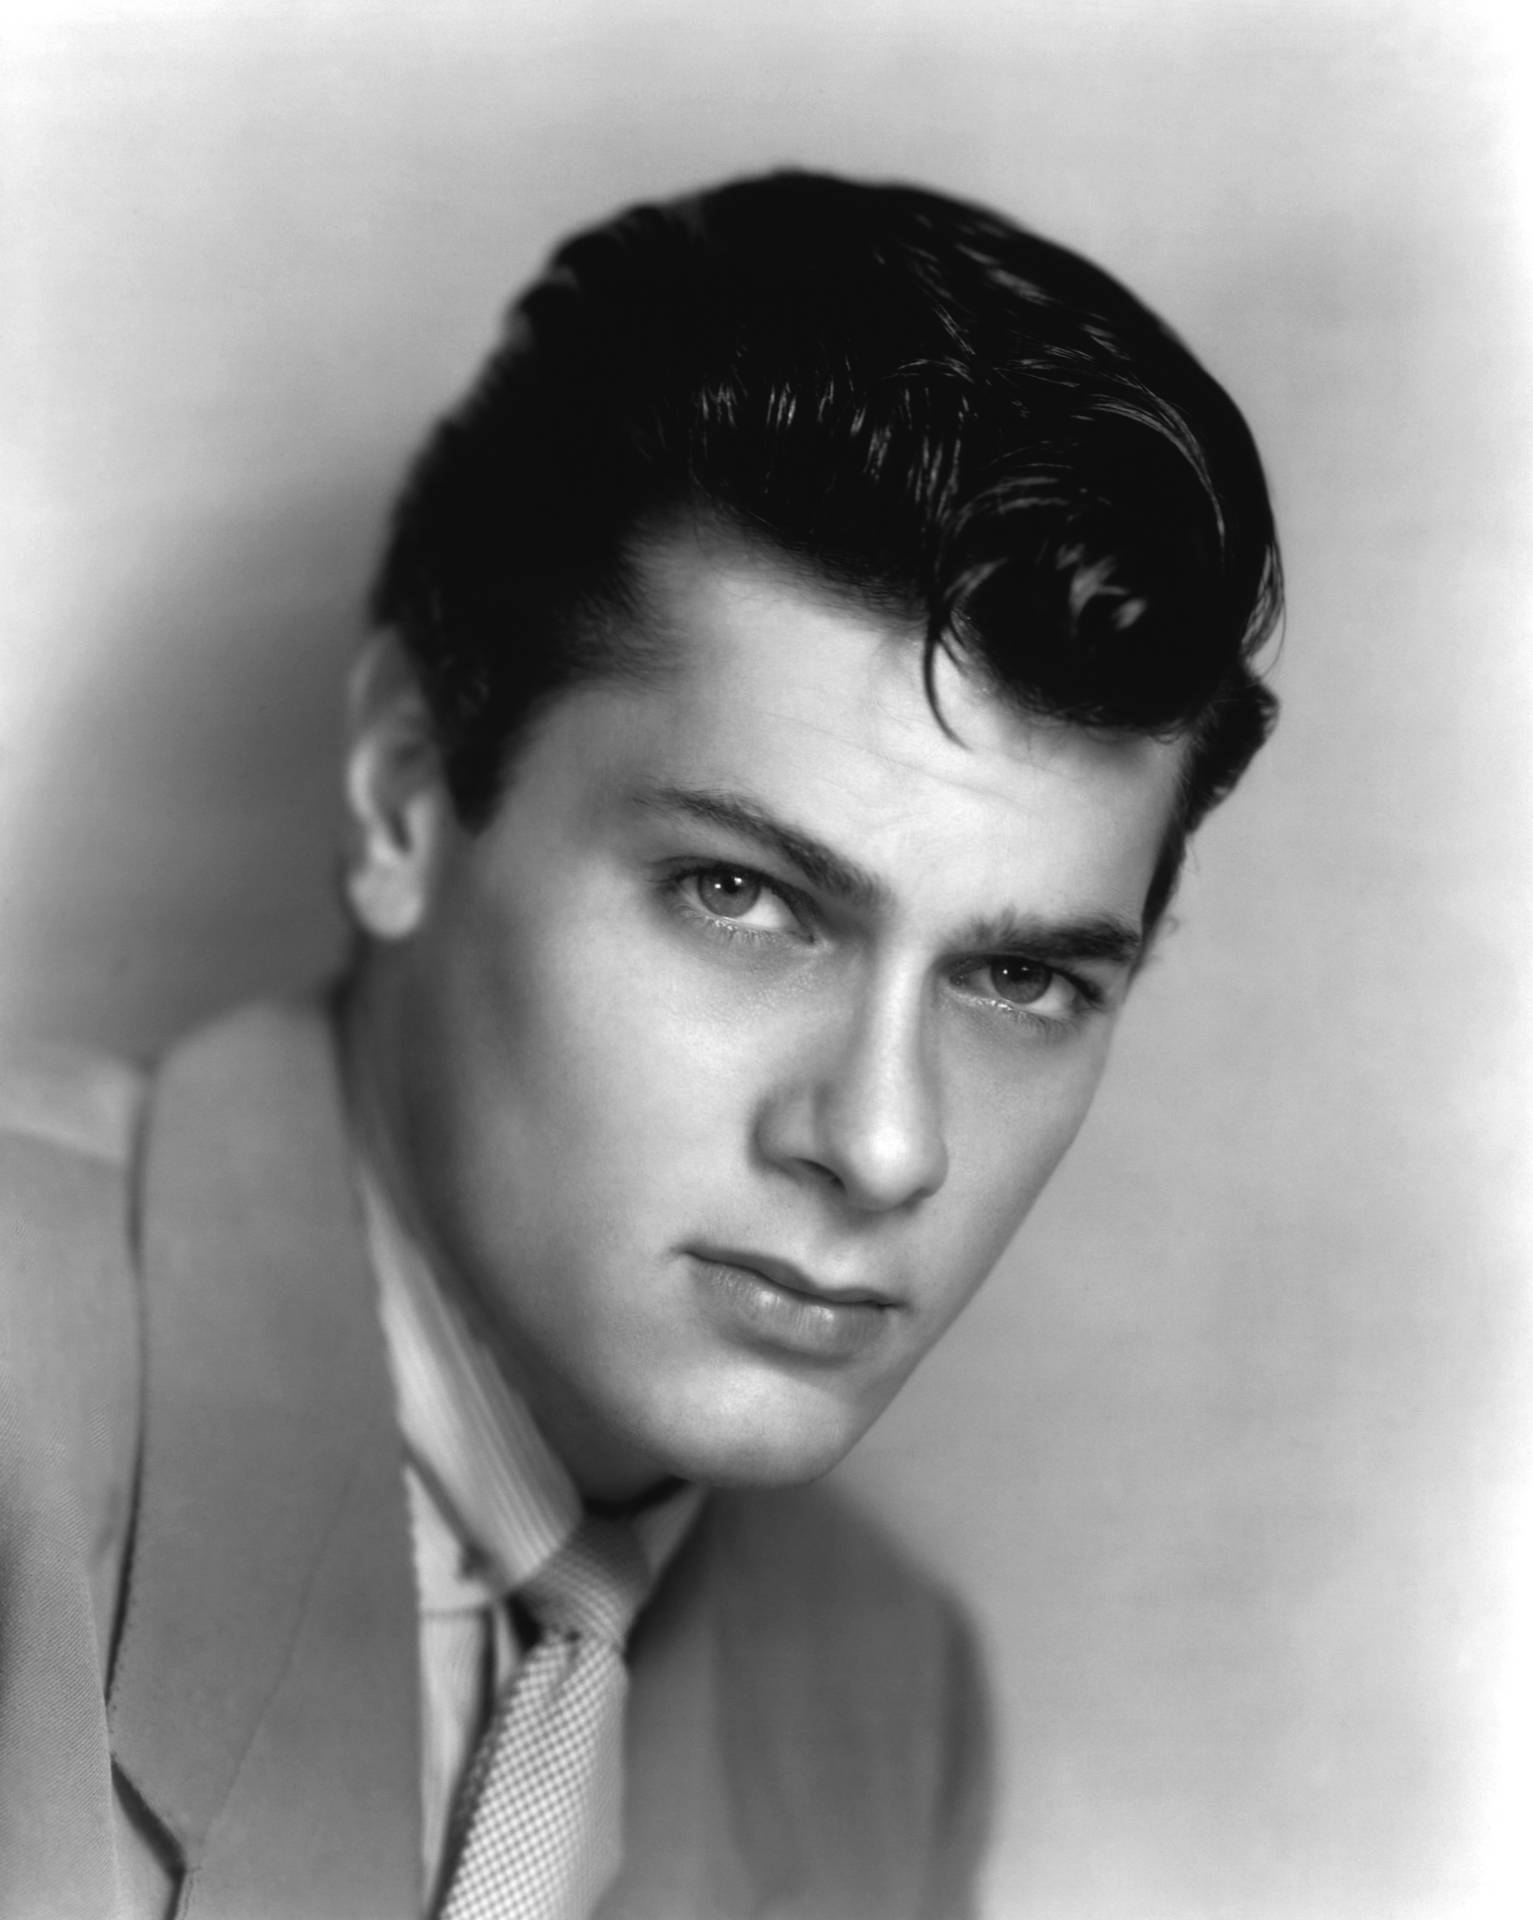 Ungetony Curtis. (this Is A Literal Translation, But Depending On The Context And Tone, It May Be More Idiomatic To Say Something Like 